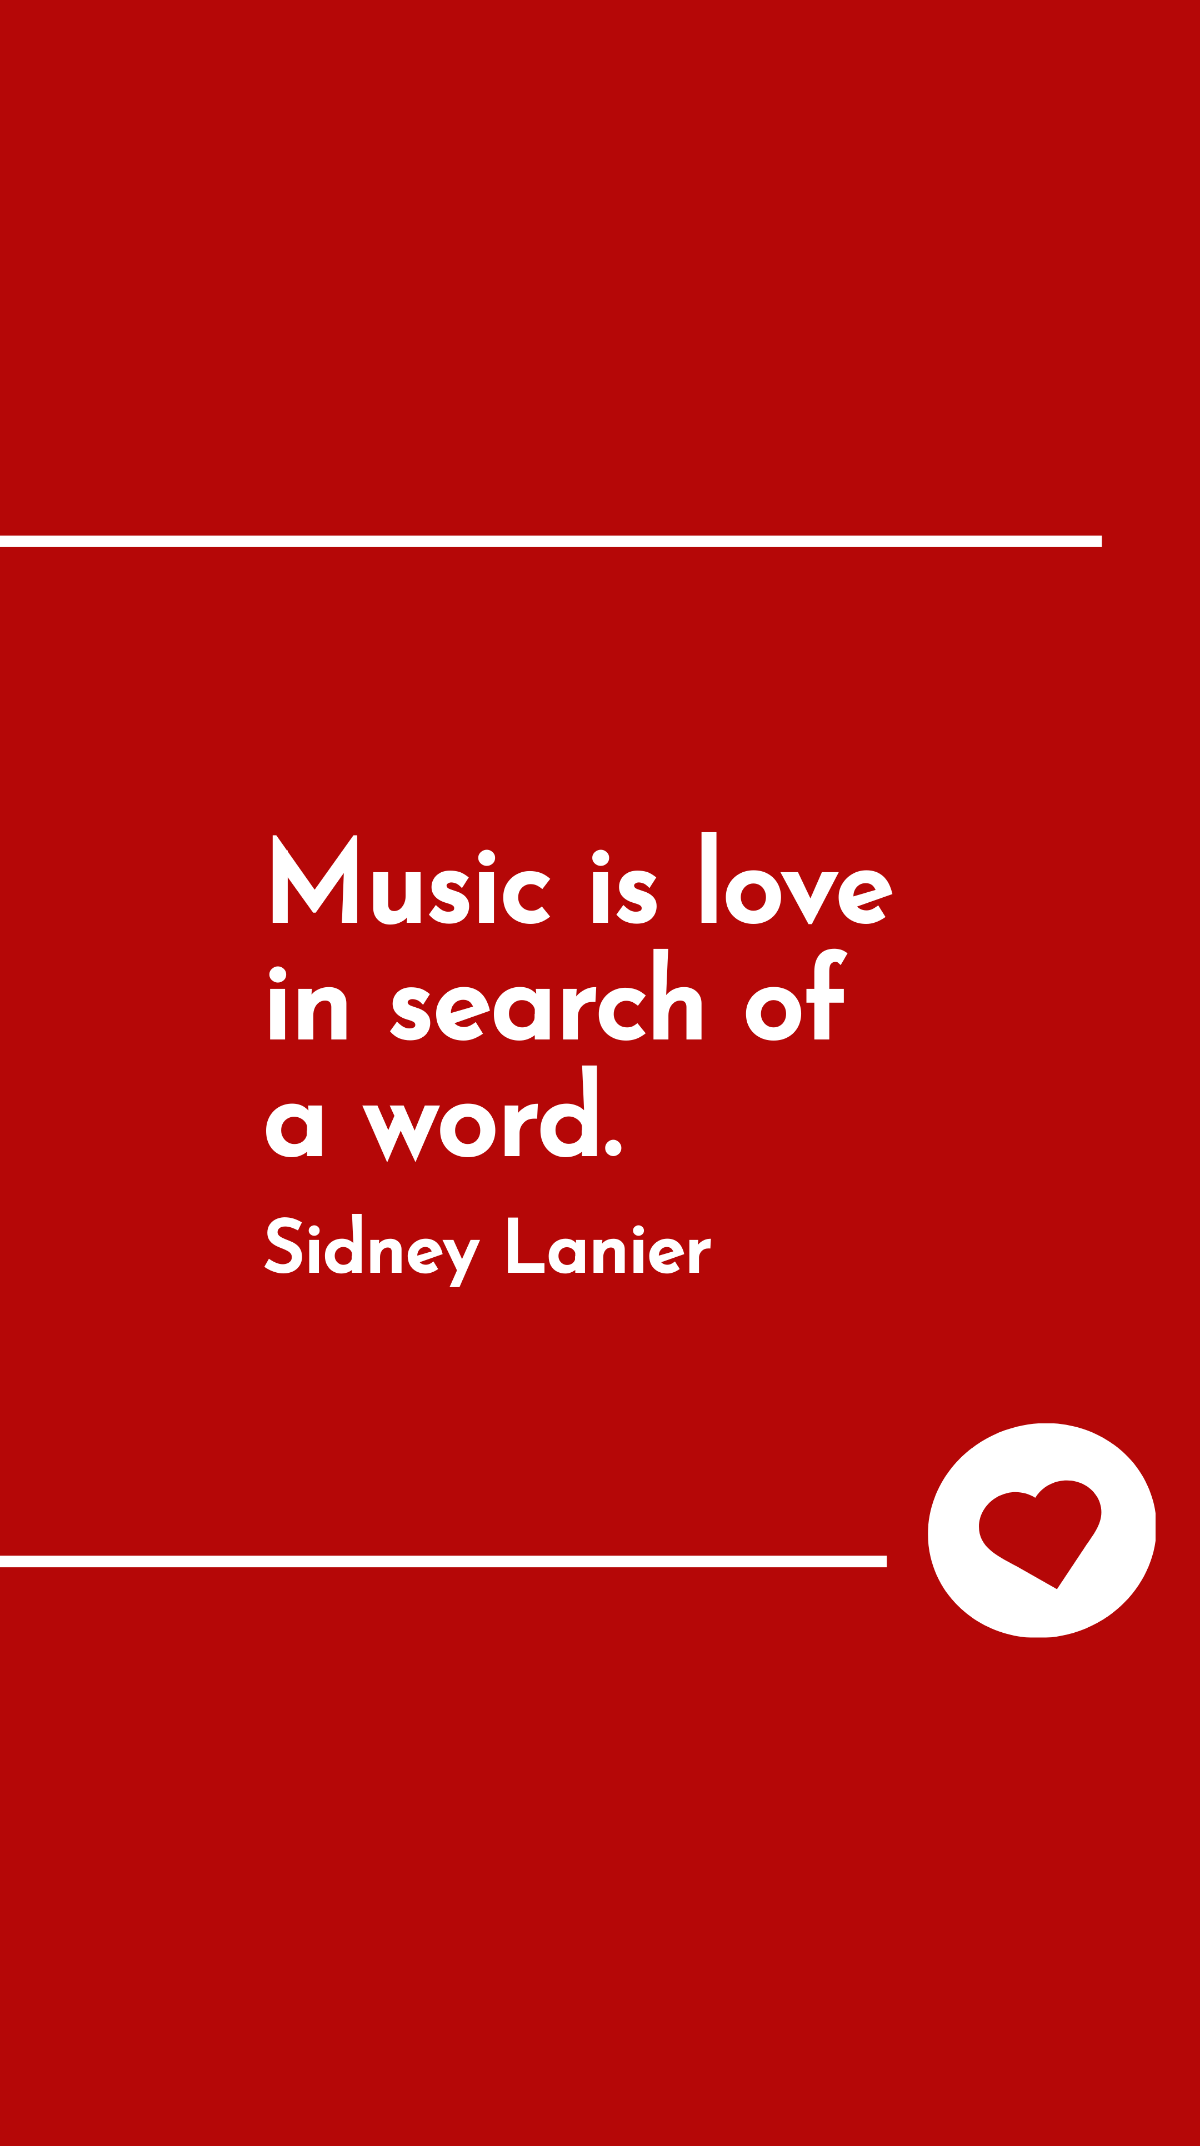 Sidney Lanier - Music is love in search of a word. Template